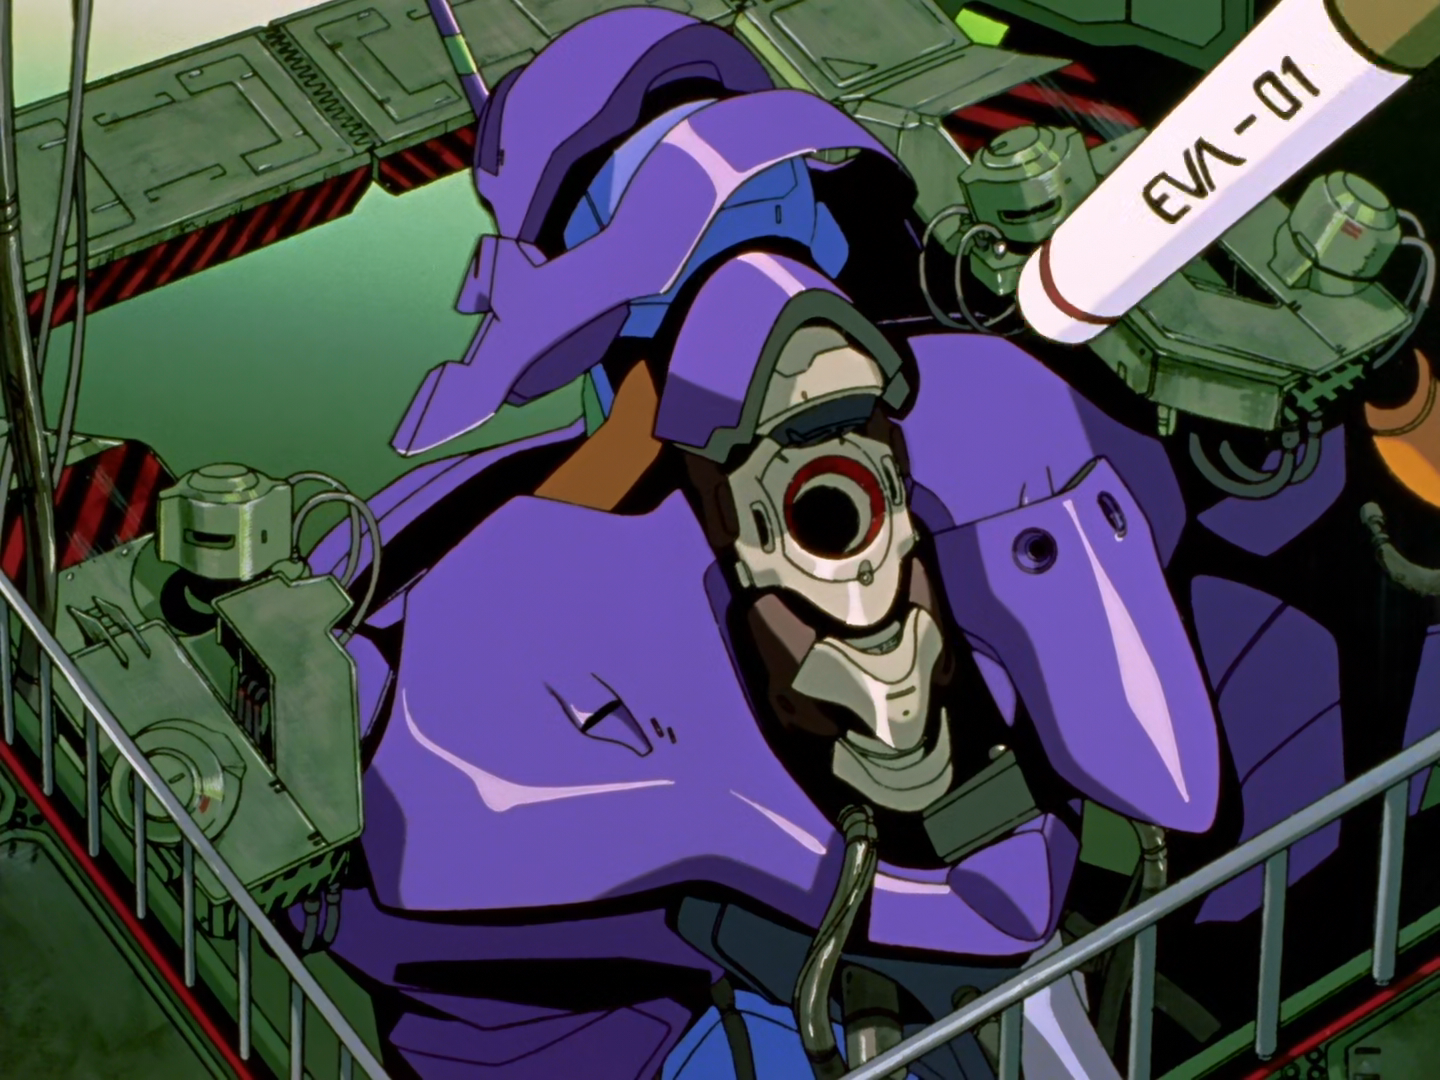 https://static.wikia.nocookie.net/evangelion/images/9/9d/NGE01_111.png/revision/latest?cb=20190901083646